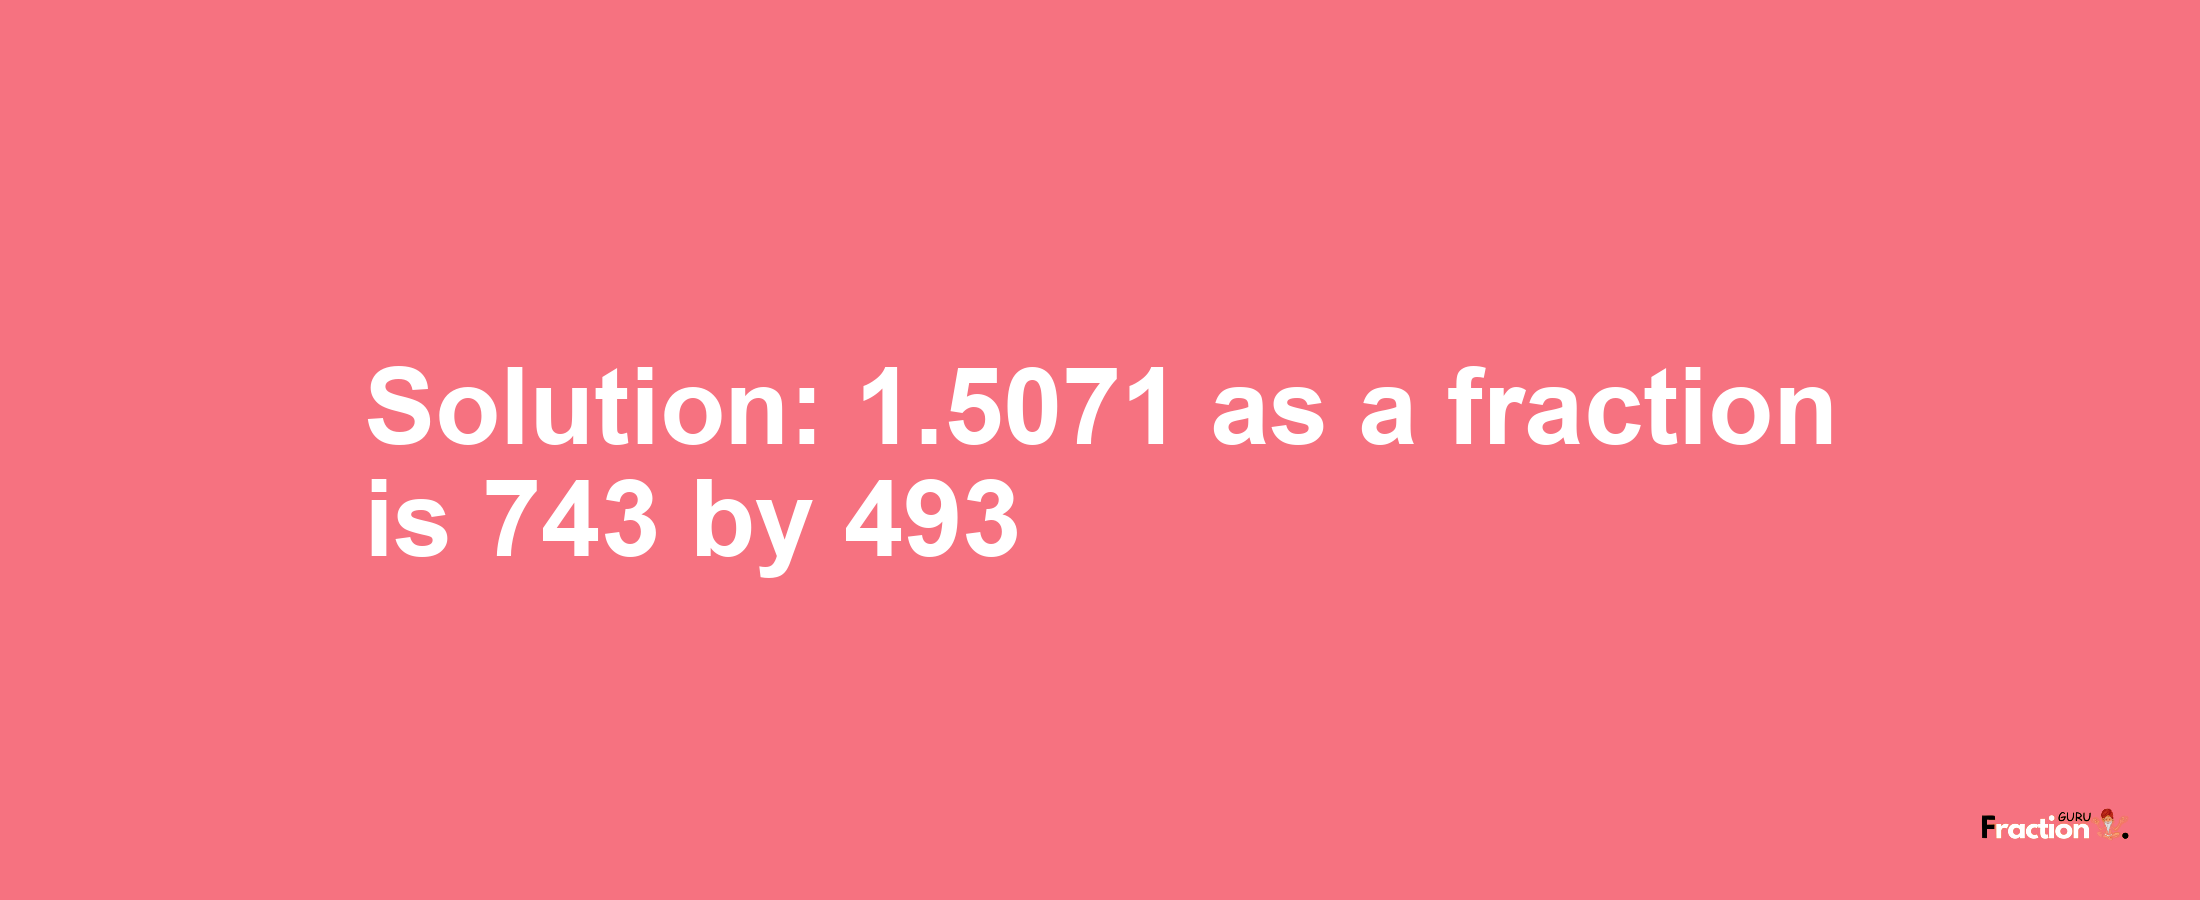 Solution:1.5071 as a fraction is 743/493